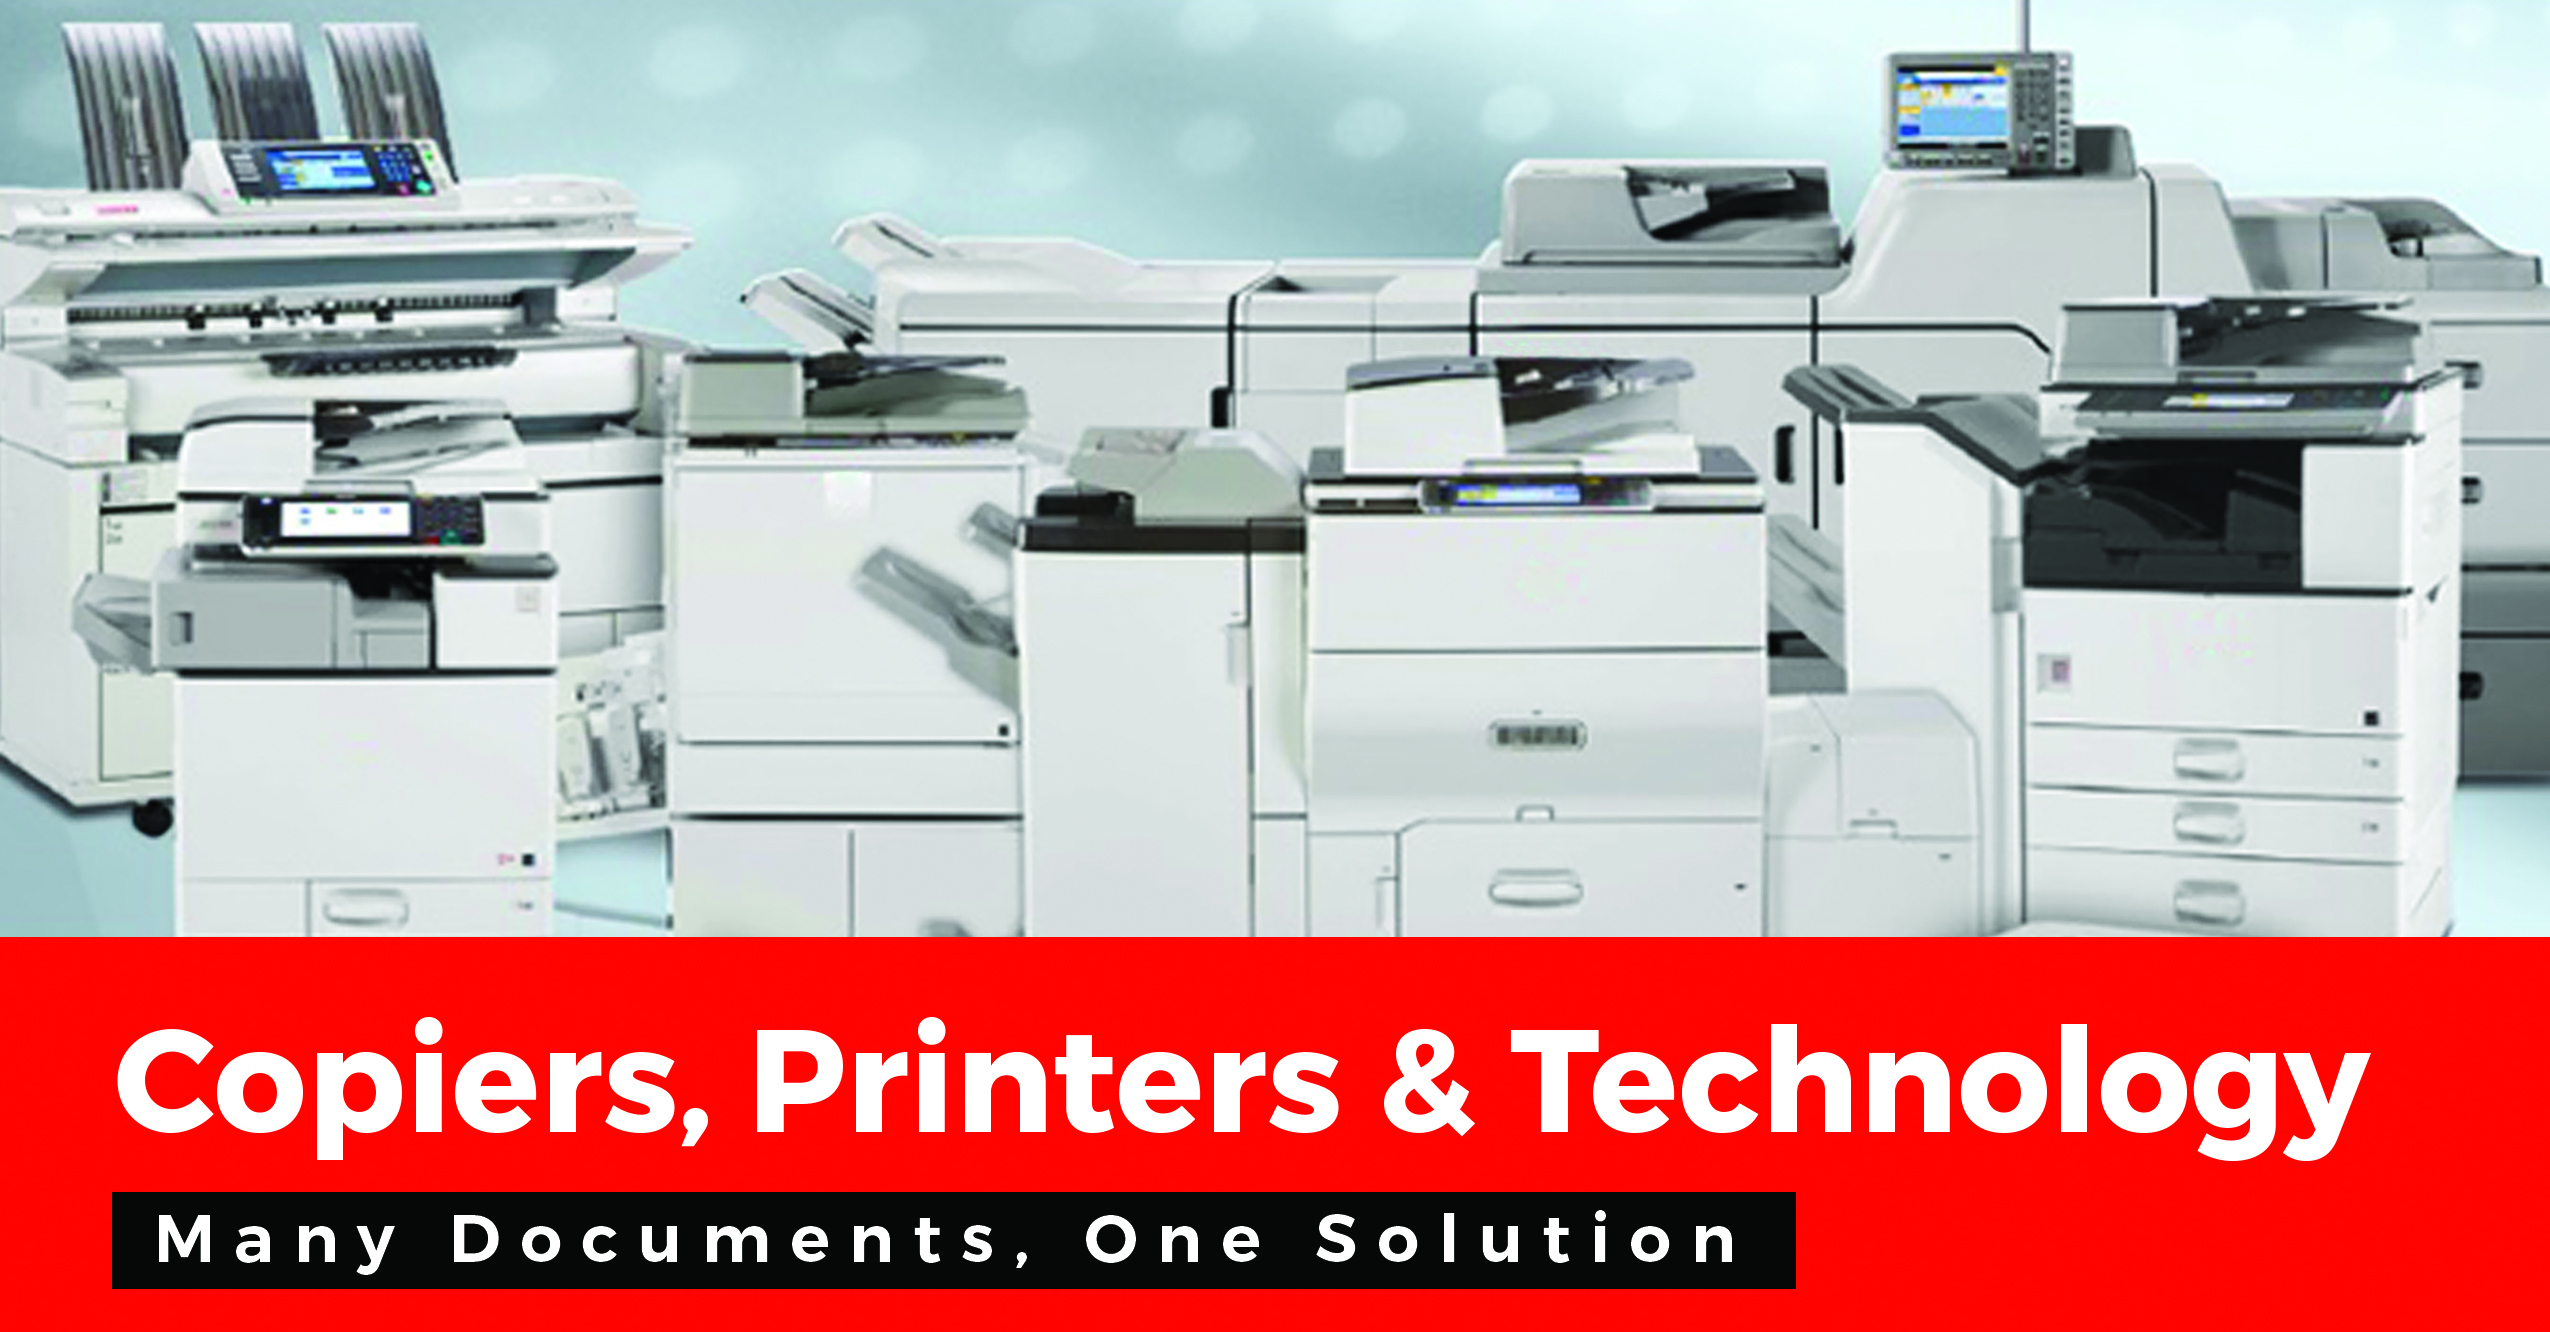 Warehouse Direct Copiers, Printers & Technology 